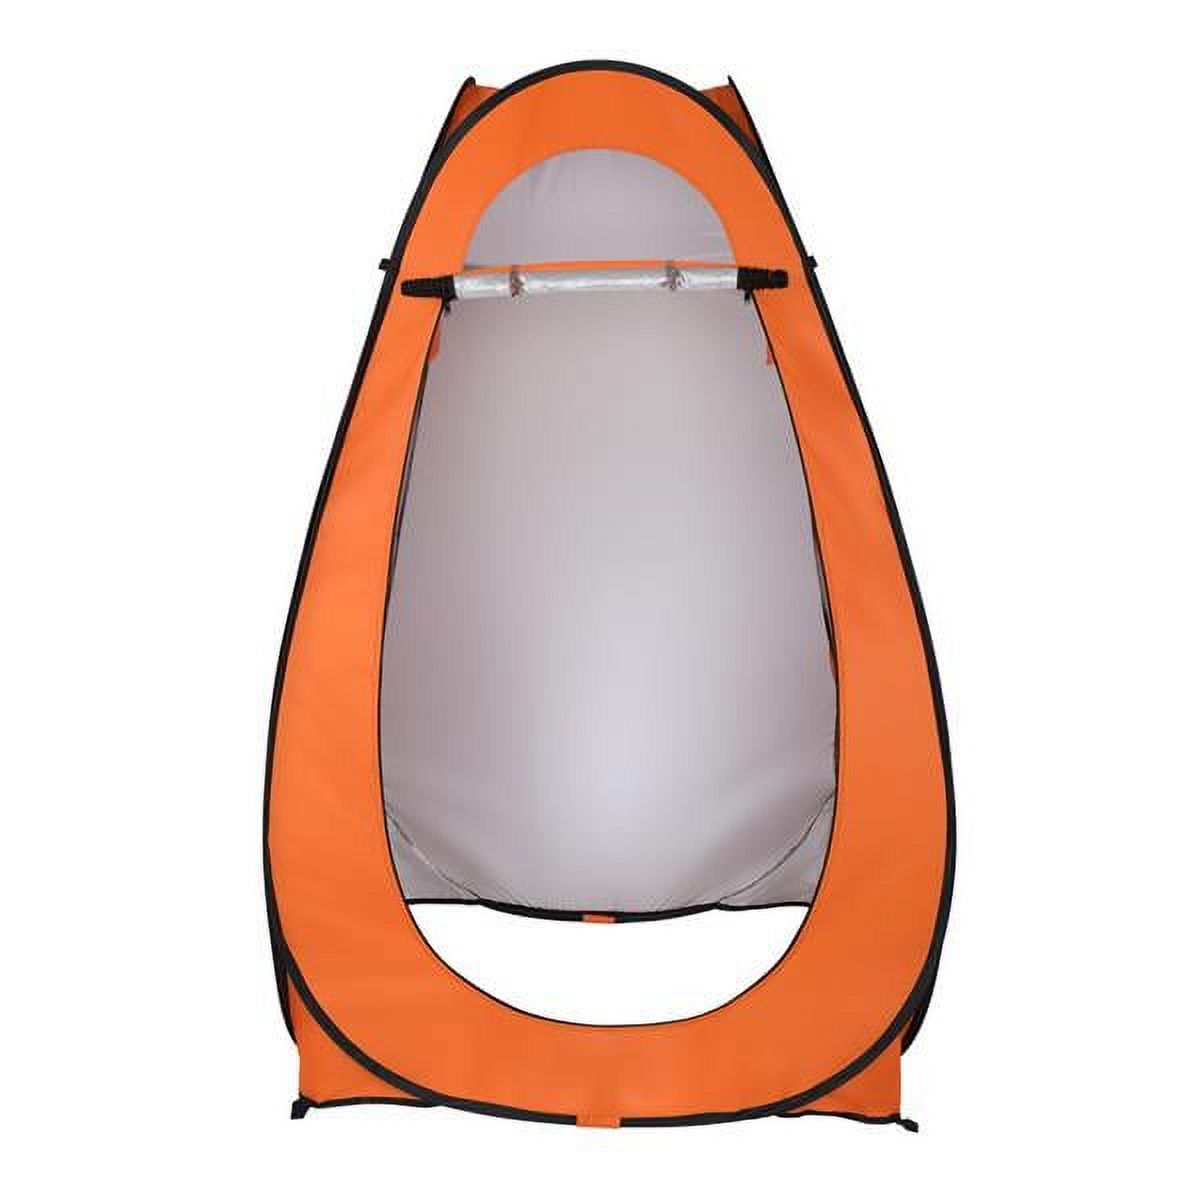 Goorabbit Shower Tents For Camping Pop-Up Privacy TentPortable Shower Tent Outdoor Camp Bathroom Changing Dressing Room Instant Privacy Shelters for Hiking Beach Picnic Fishing Potty - image 3 of 11